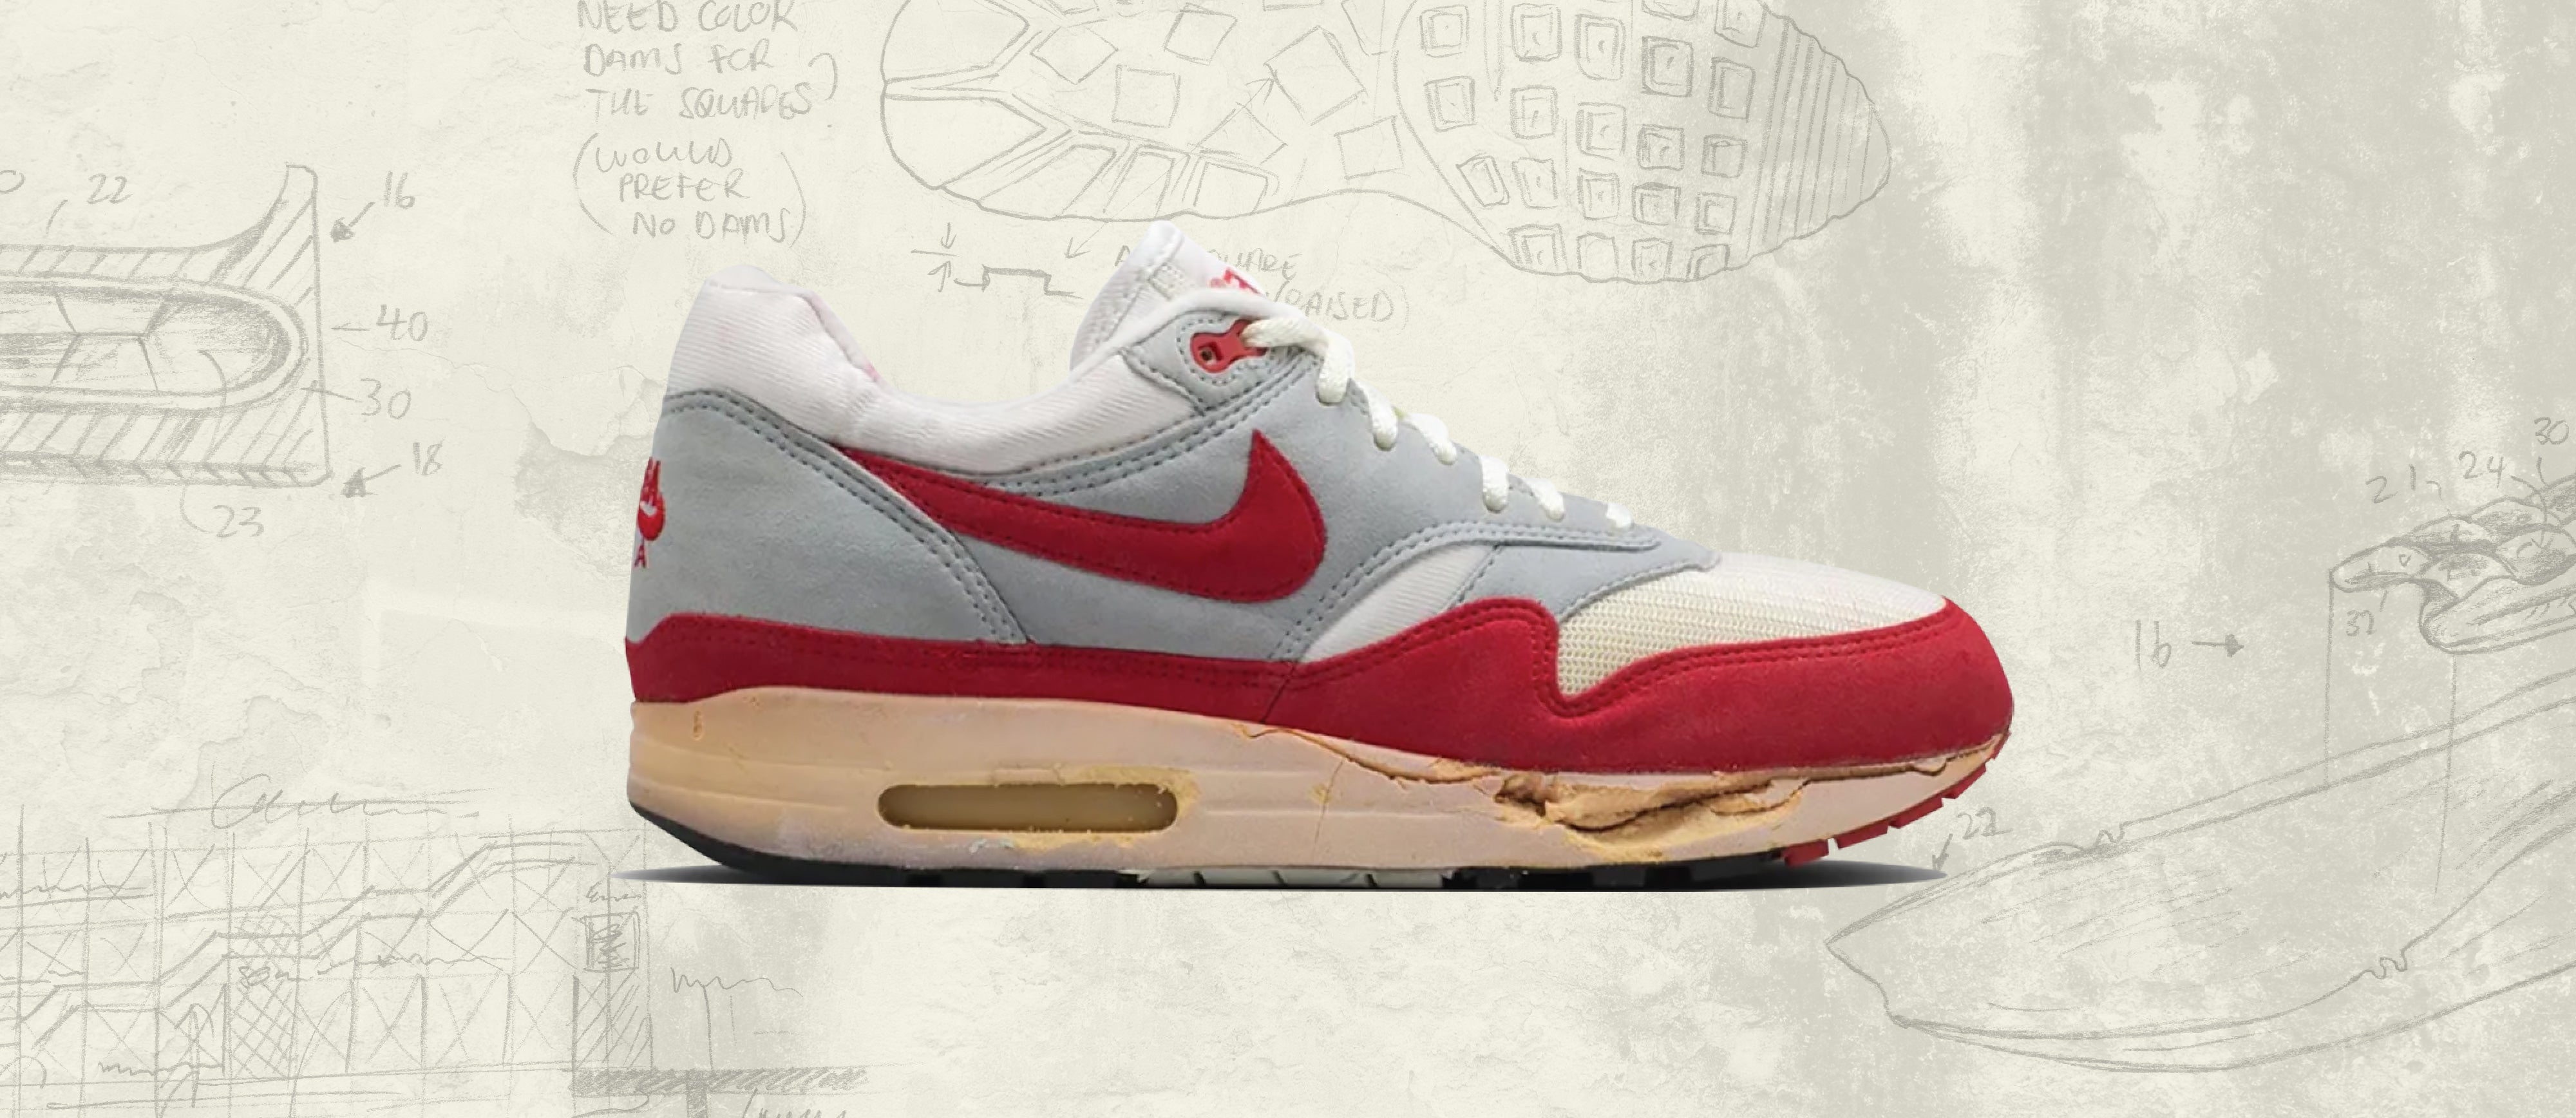 Nike Brought Back the OG Air Max 1